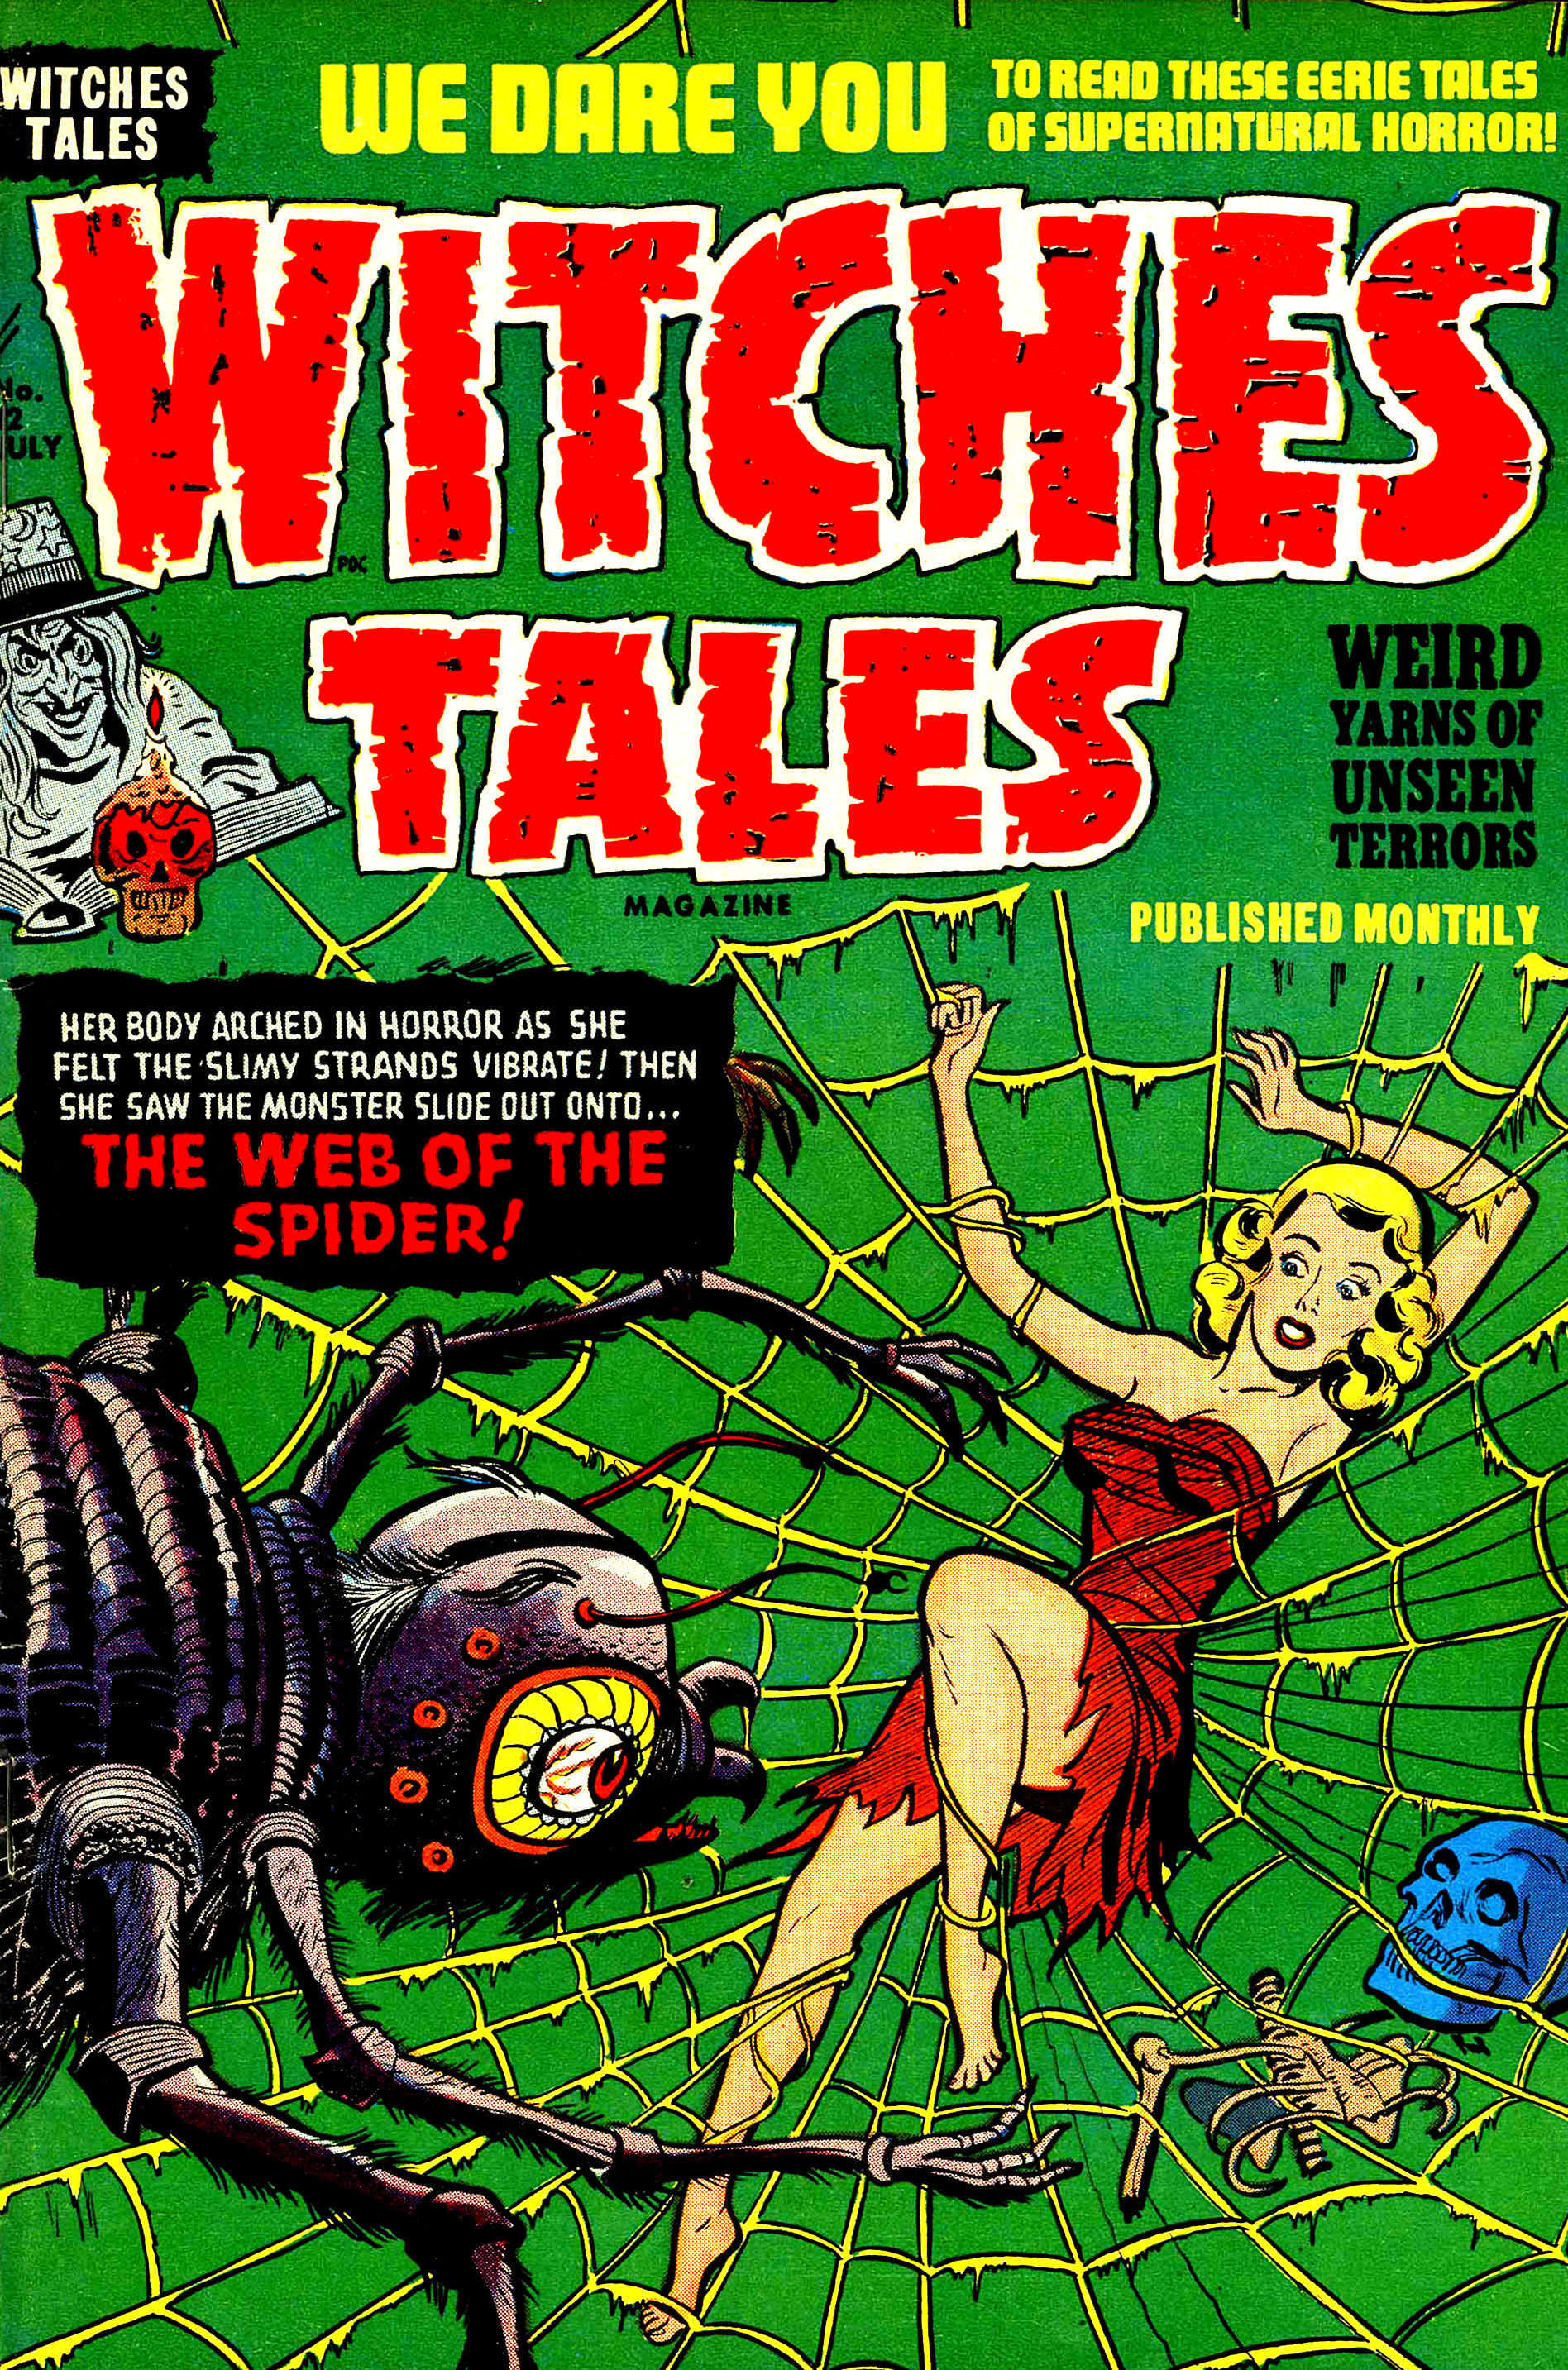 Witches Tales #12, Al Avison Cover (Harvey, 1952)